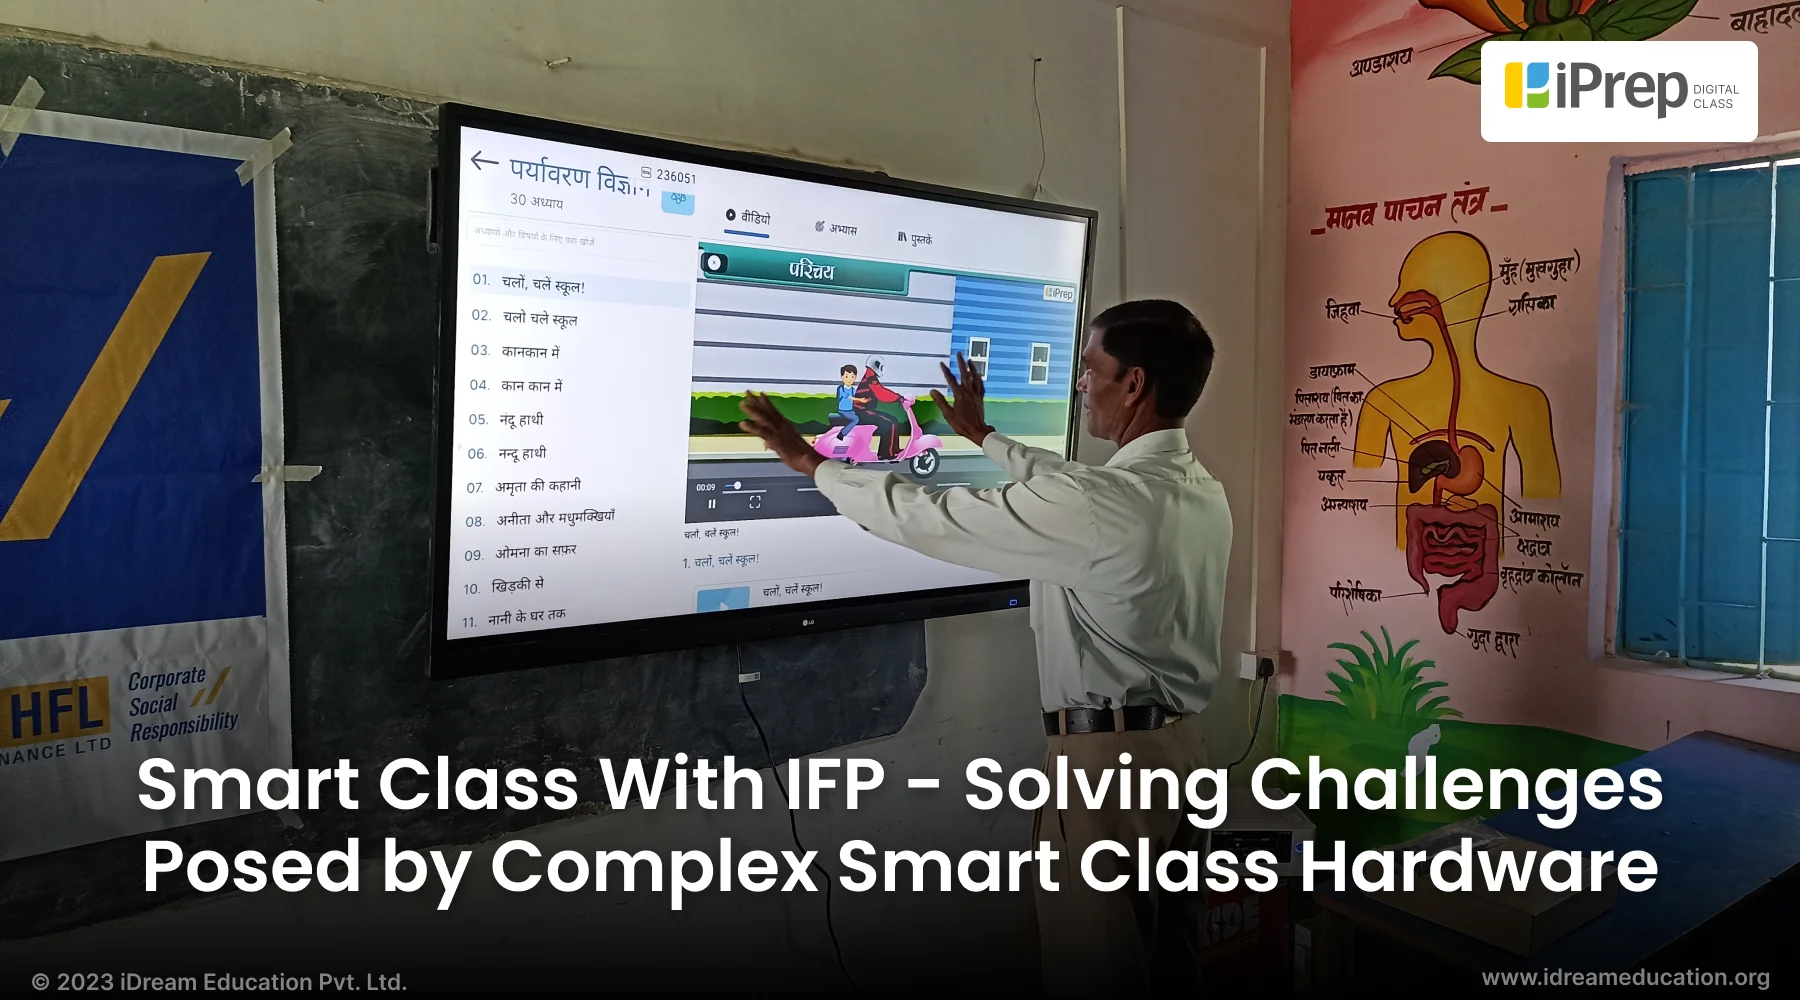 A visual of how a smart class with IFP or other android hardware options can make smart class experience simpler for teachers by solving complex hardware challenges